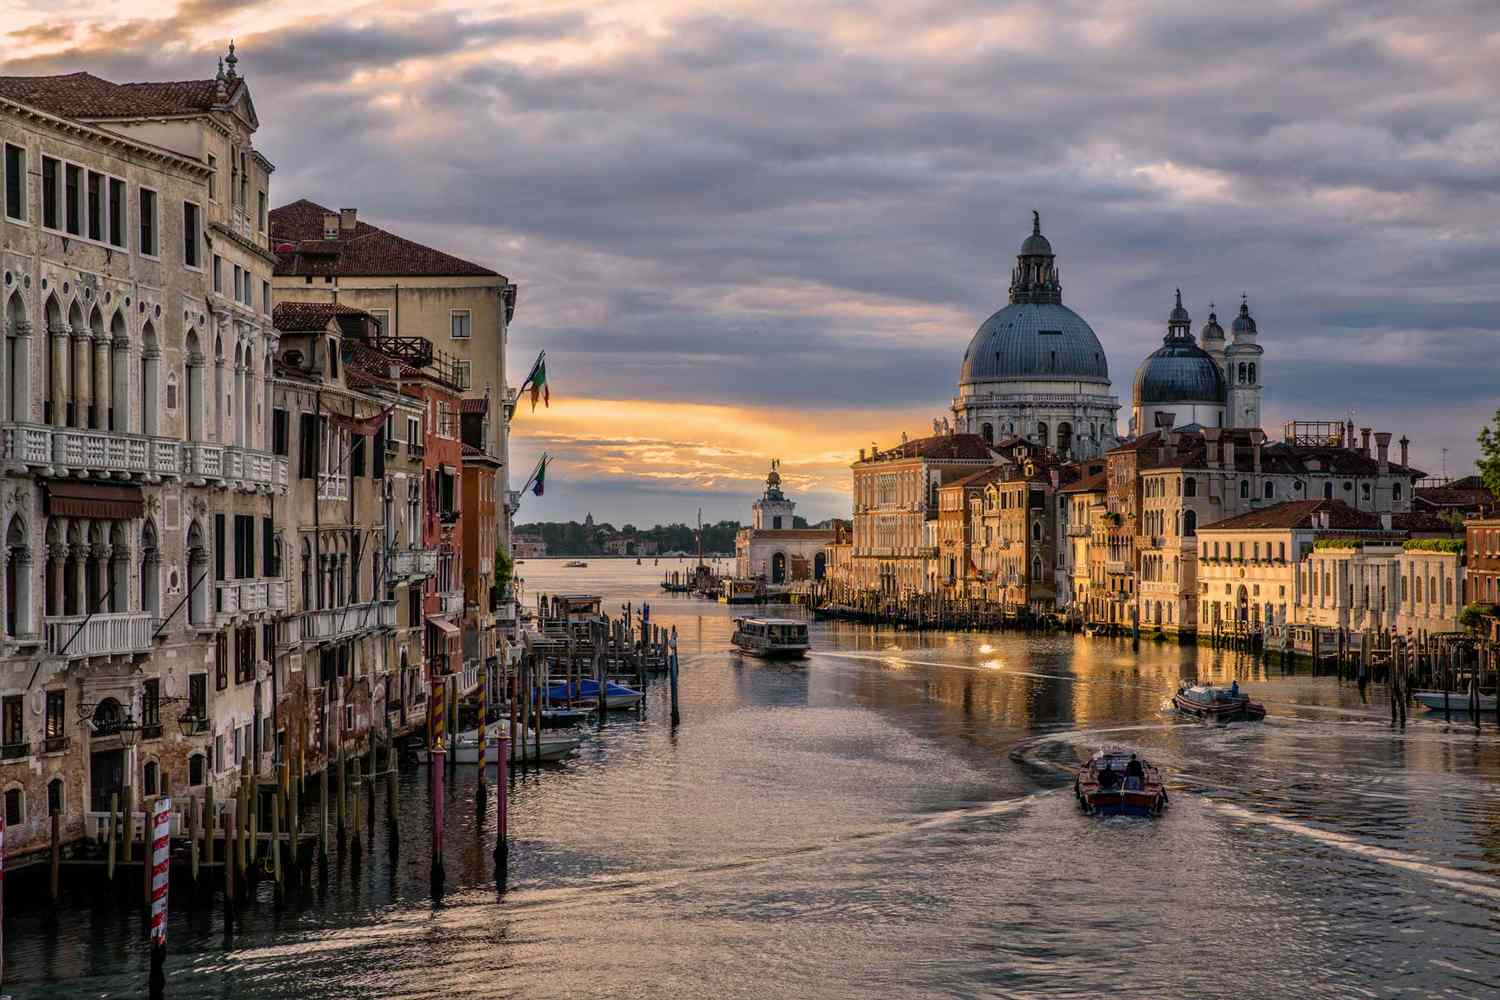 Venice A City Tour By Boat – The Way It Was Meant To Be